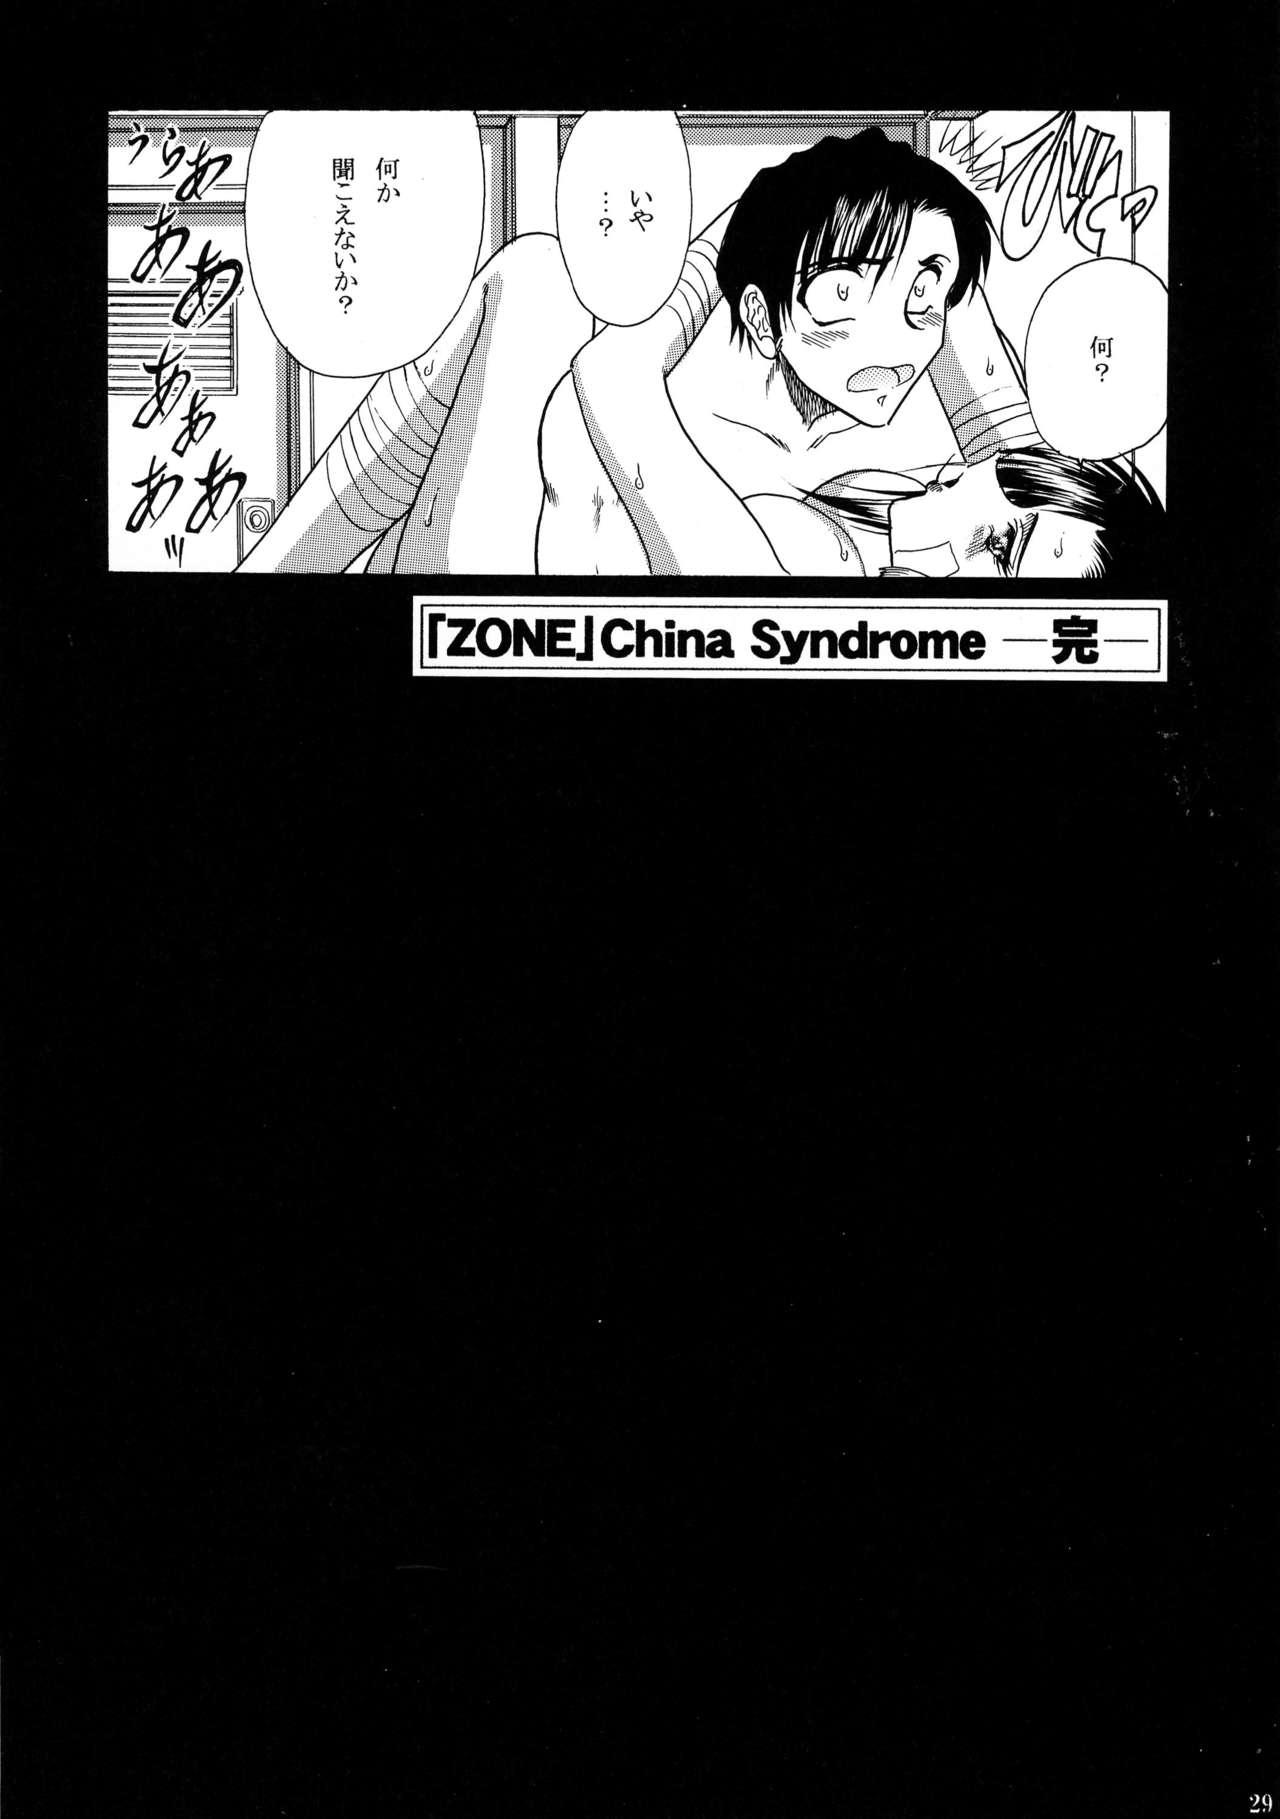 Eating Pussy ZONE 38 China Syndrome - Black lagoon Camera - Page 28